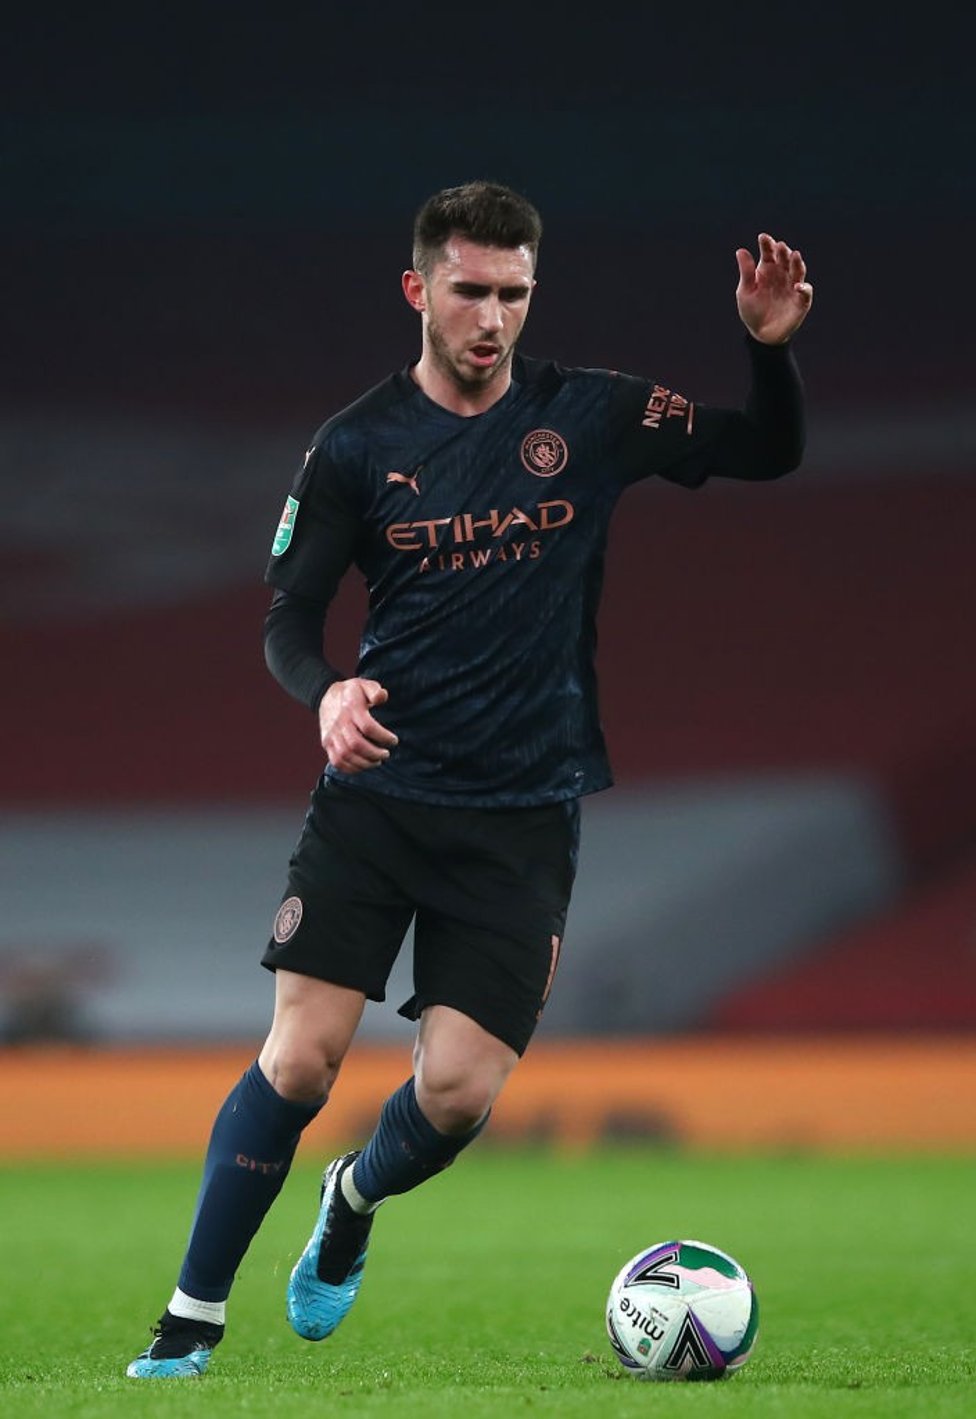 LAPORTEING FOR DUTY: Aymeric Laporte brings the ball out from the back